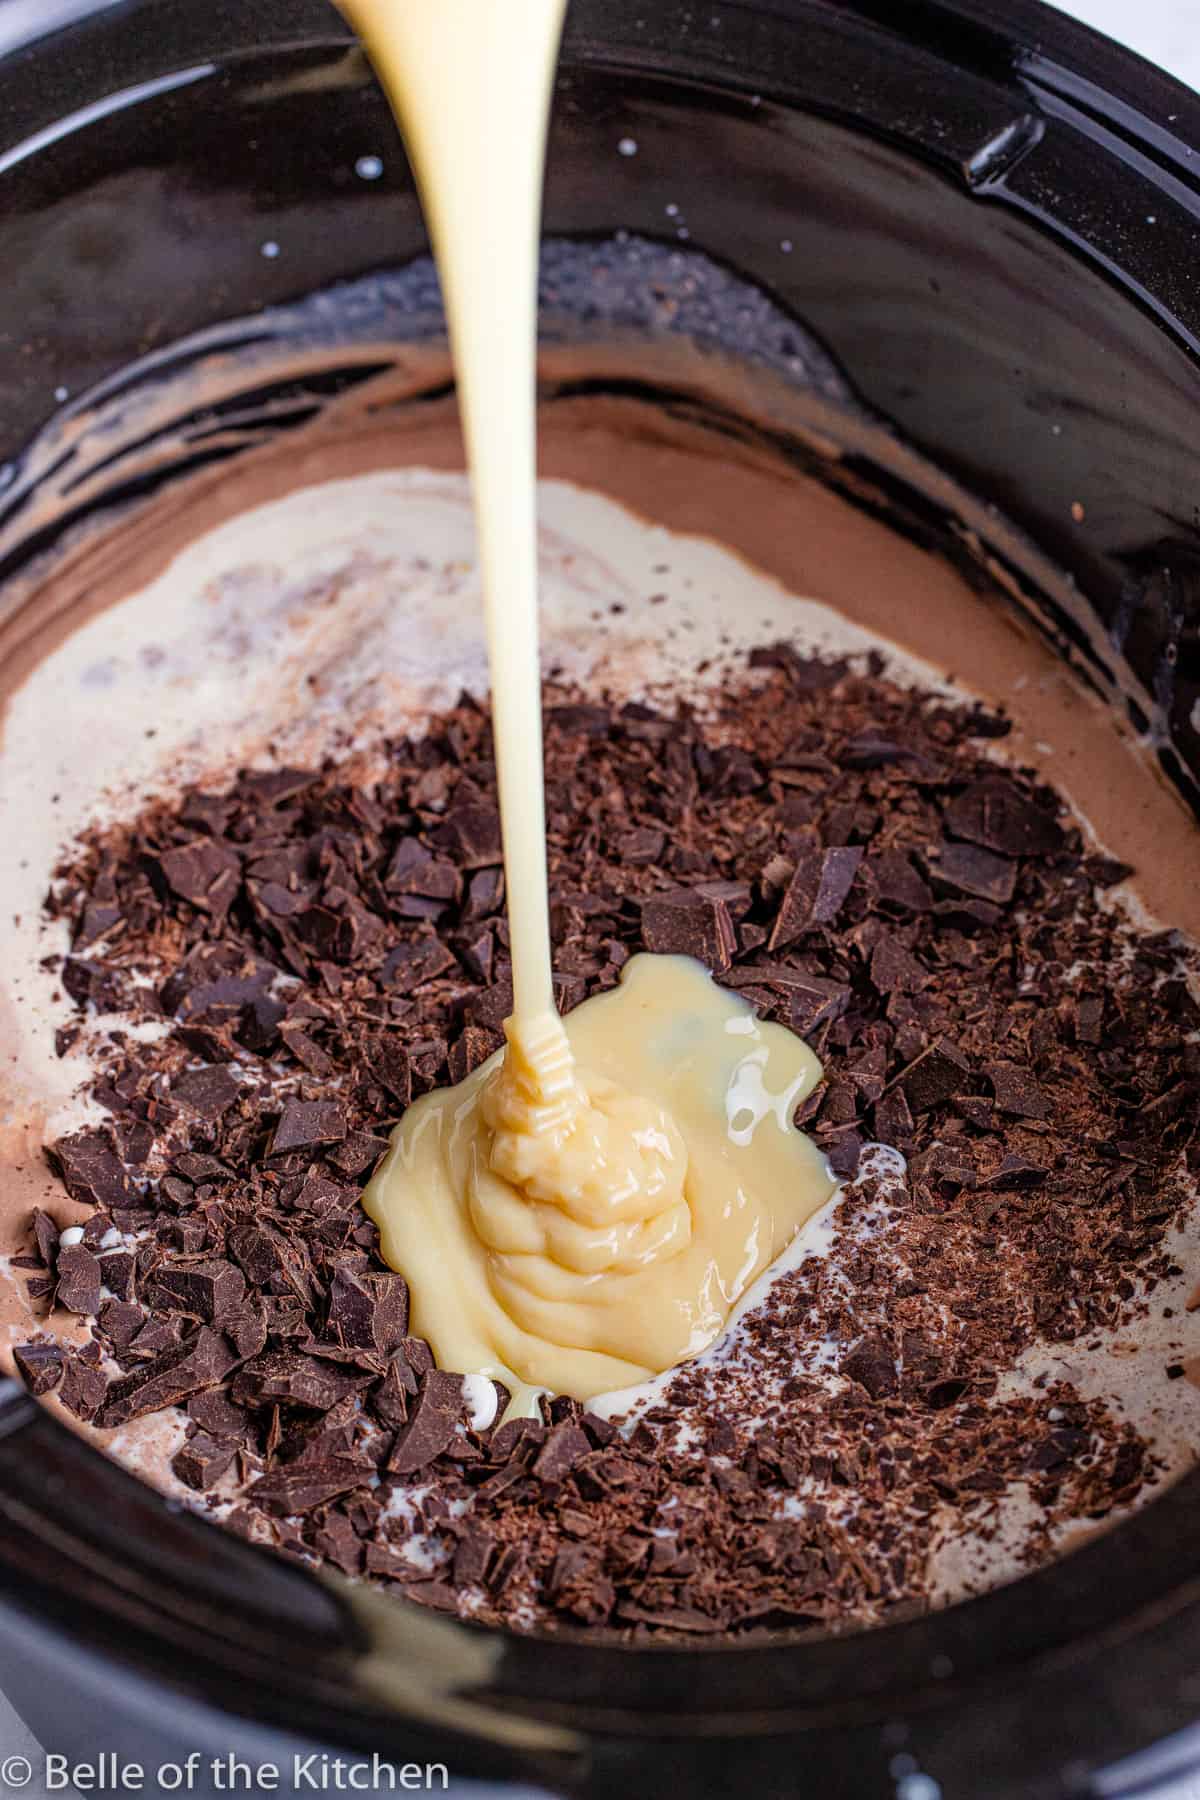 condensed milk is being poured into a crockpot of milk and chocolate